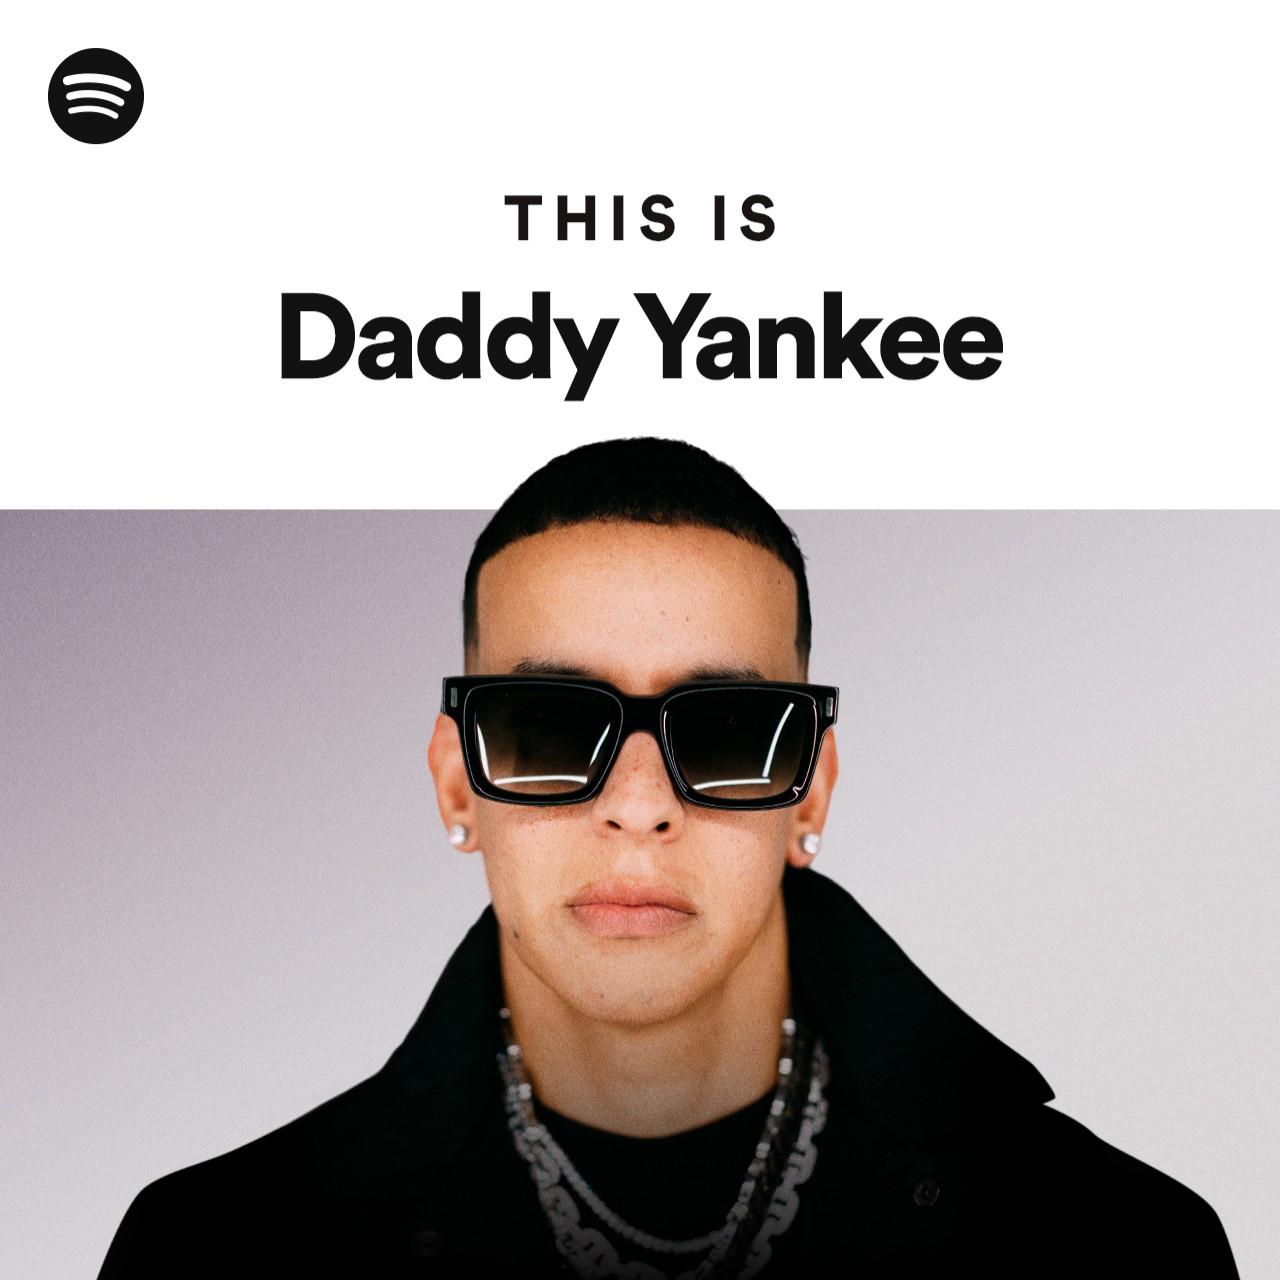 This Is Daddy Yankee | Spotify Playlist